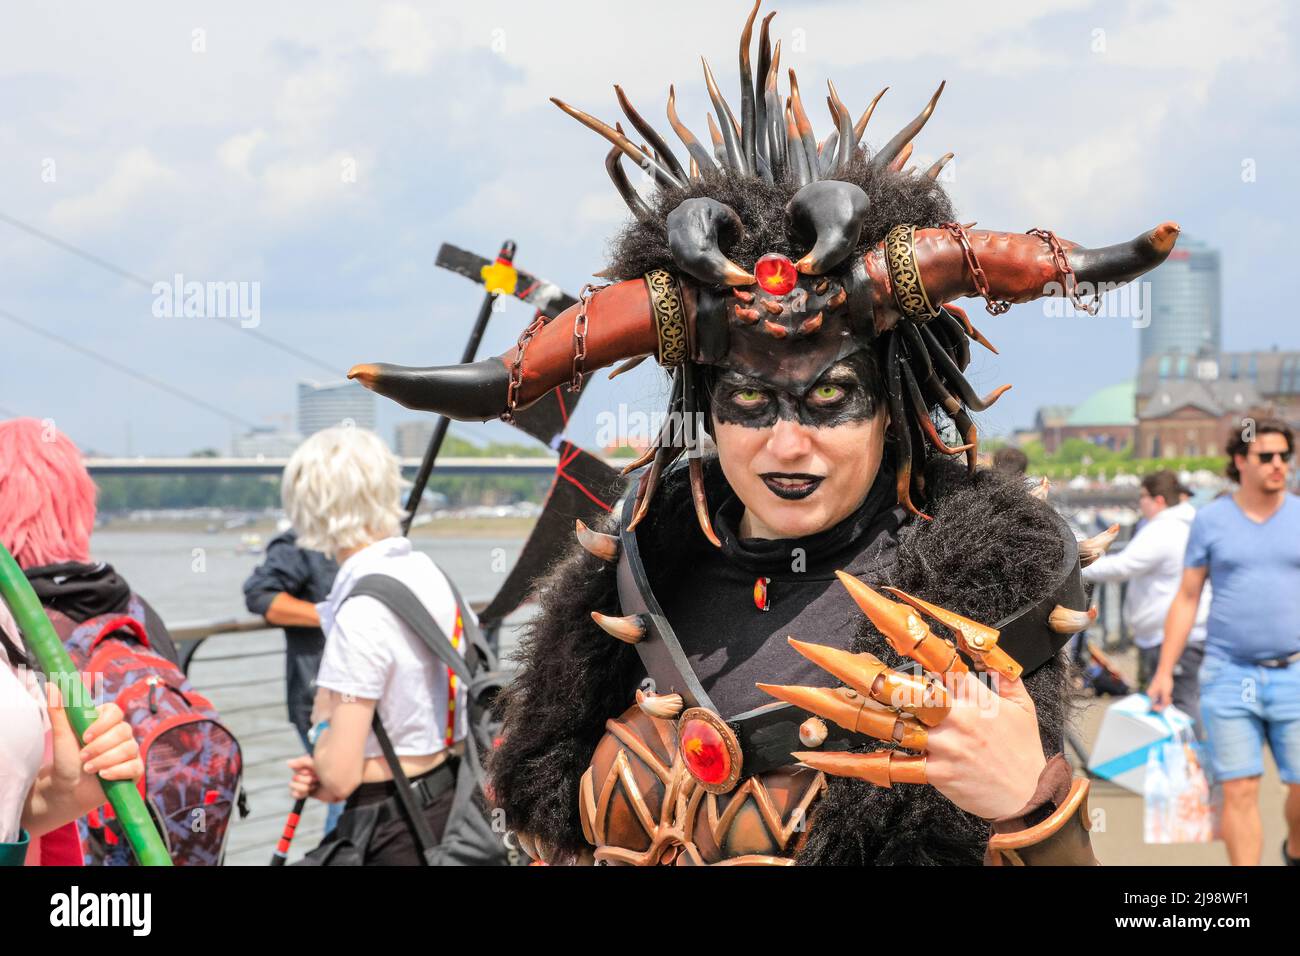 Düsseldorf, NRW, Germany. 21st May, 2022. Cosplayers happily pose for the camera. Tens of thousands of visitors and cosplayers enjoy the warm sunshine along the river Rhine embankment in their outfits inspired by Japanese anime, video and games. Stage performances, cosplay, stalls and demonstrations of Japanese culture, sports and traditions are featured at Düsseldorf's annual Japan Day, celebrating Japan and the Japanese community in the city. Düsseldorf is home to the largest Japanese community in Germany. Credit: Imageplotter/Alamy Live News Stock Photo